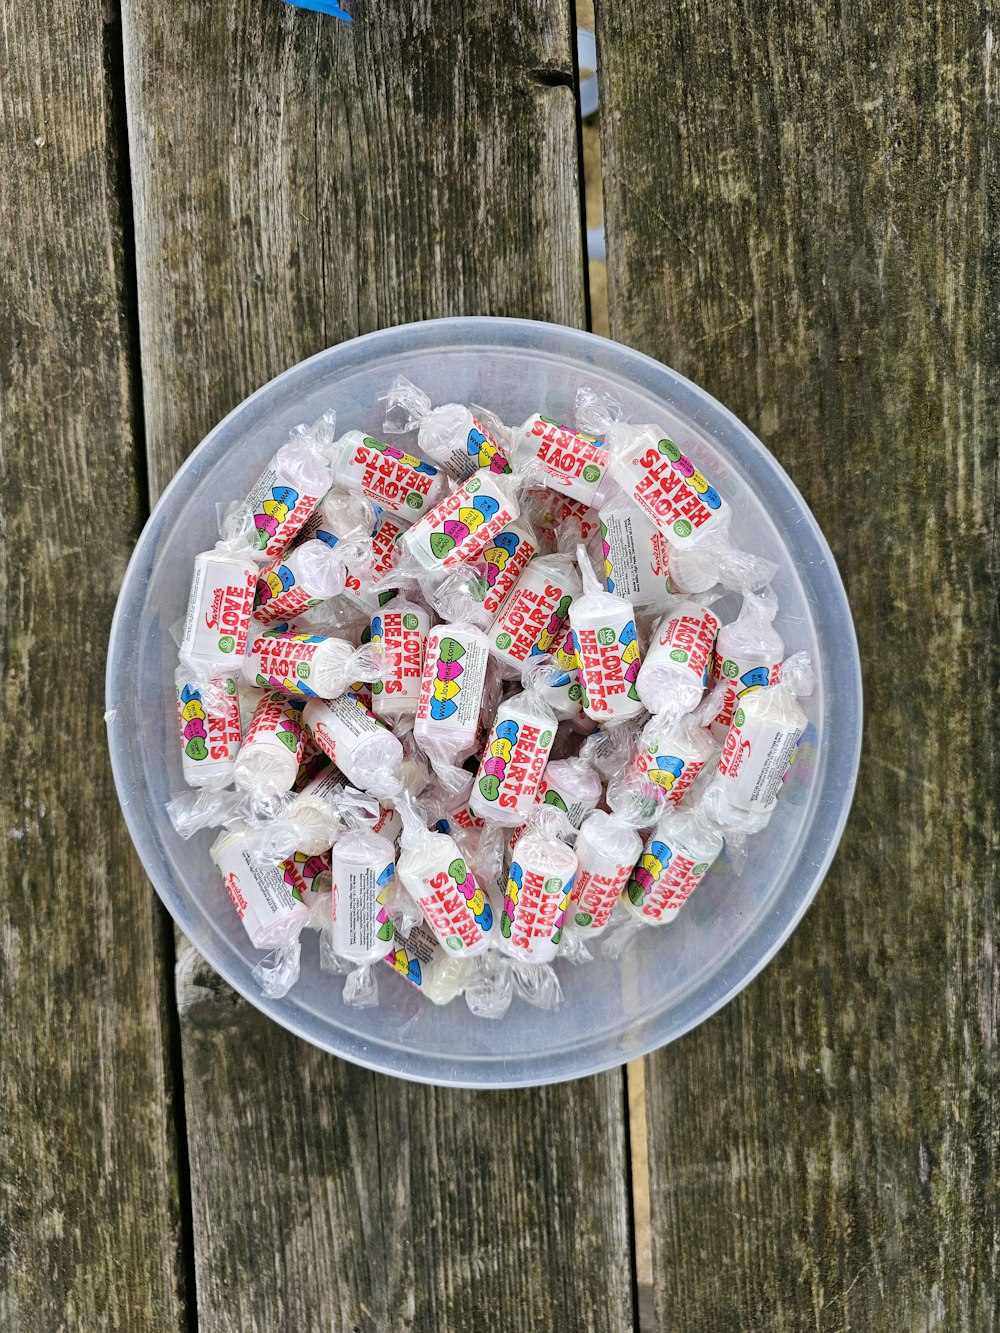 a plastic bowl filled with candy on top of a wooden table